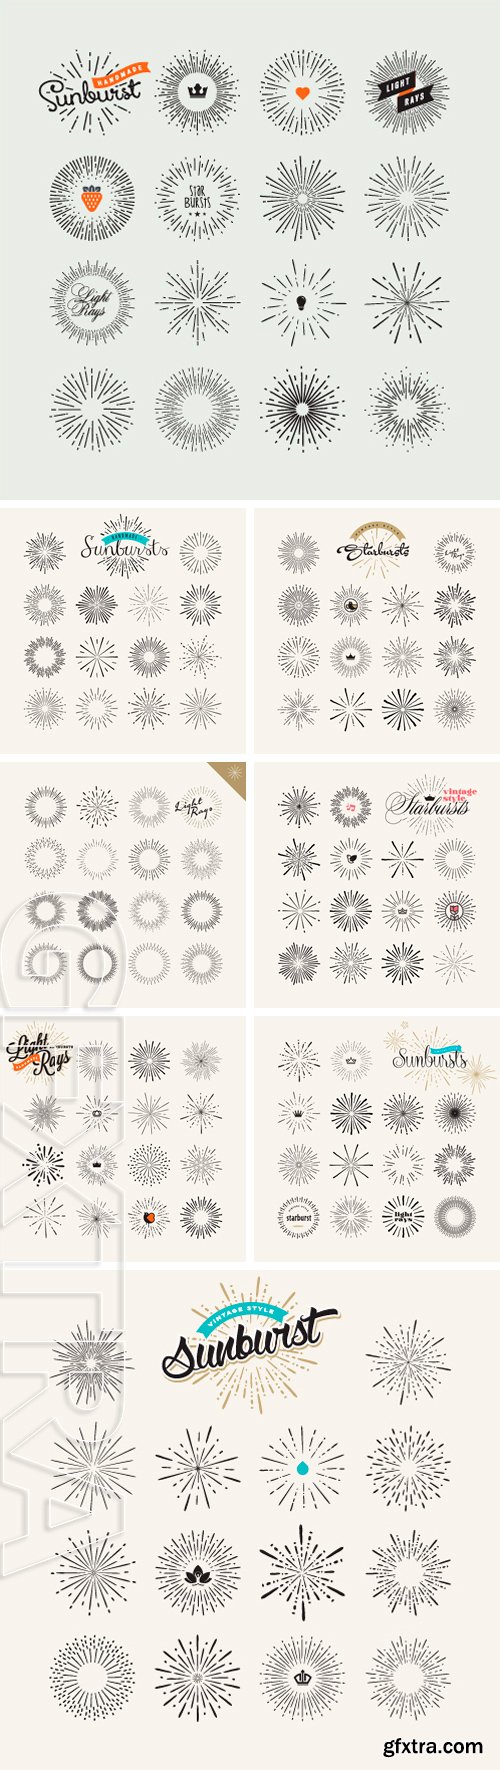 Stock Vectors - Set of vintage style elements for graphic and web design. Light rays handmade vector elements